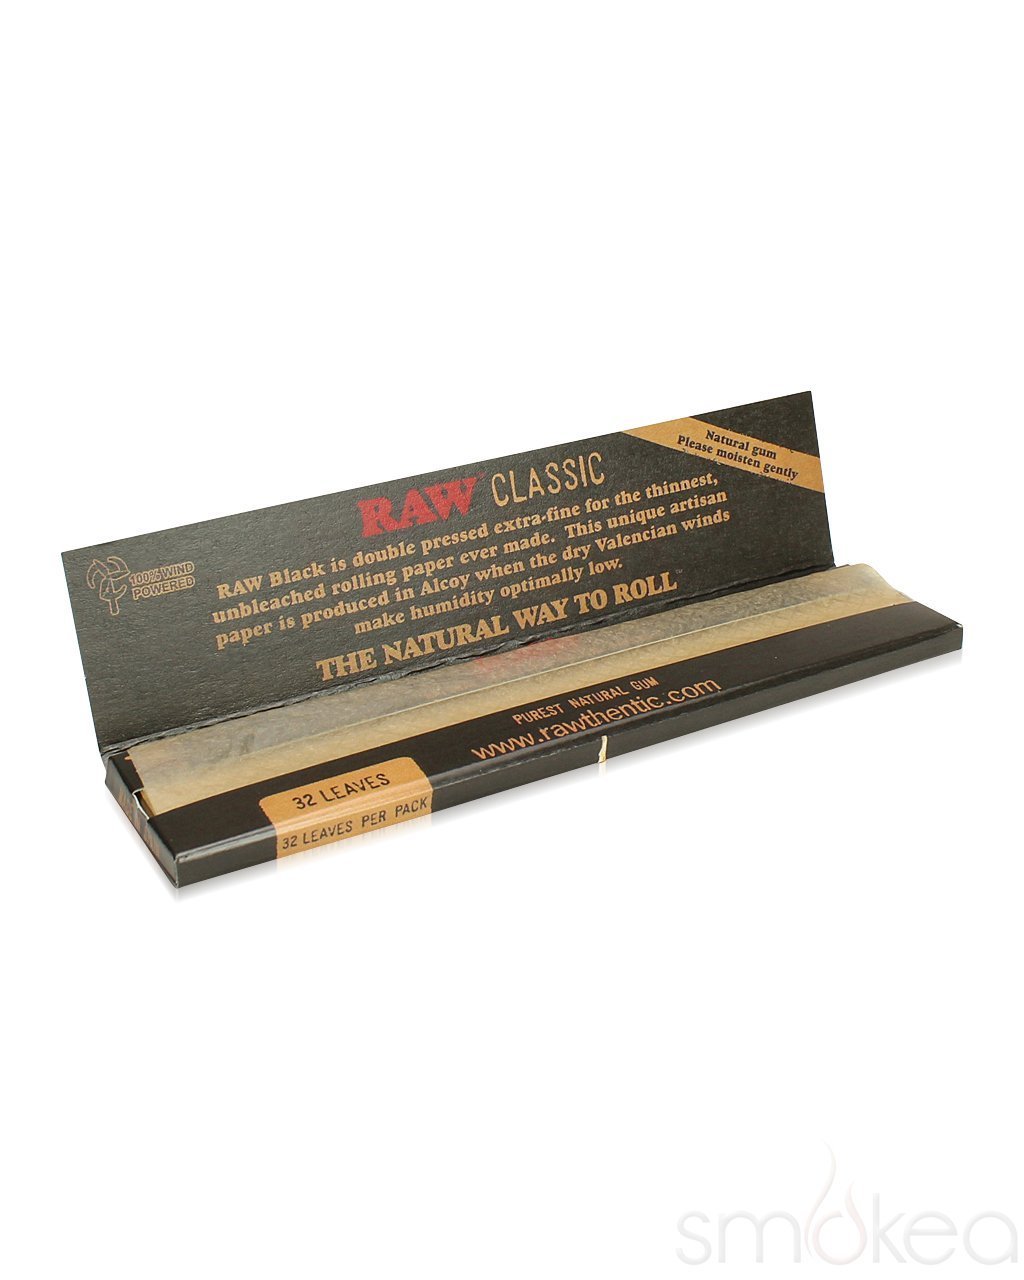 Raw Black Classic King Size Slim Rolling Papers (Full Box) - Bittchaser Smoke Shop